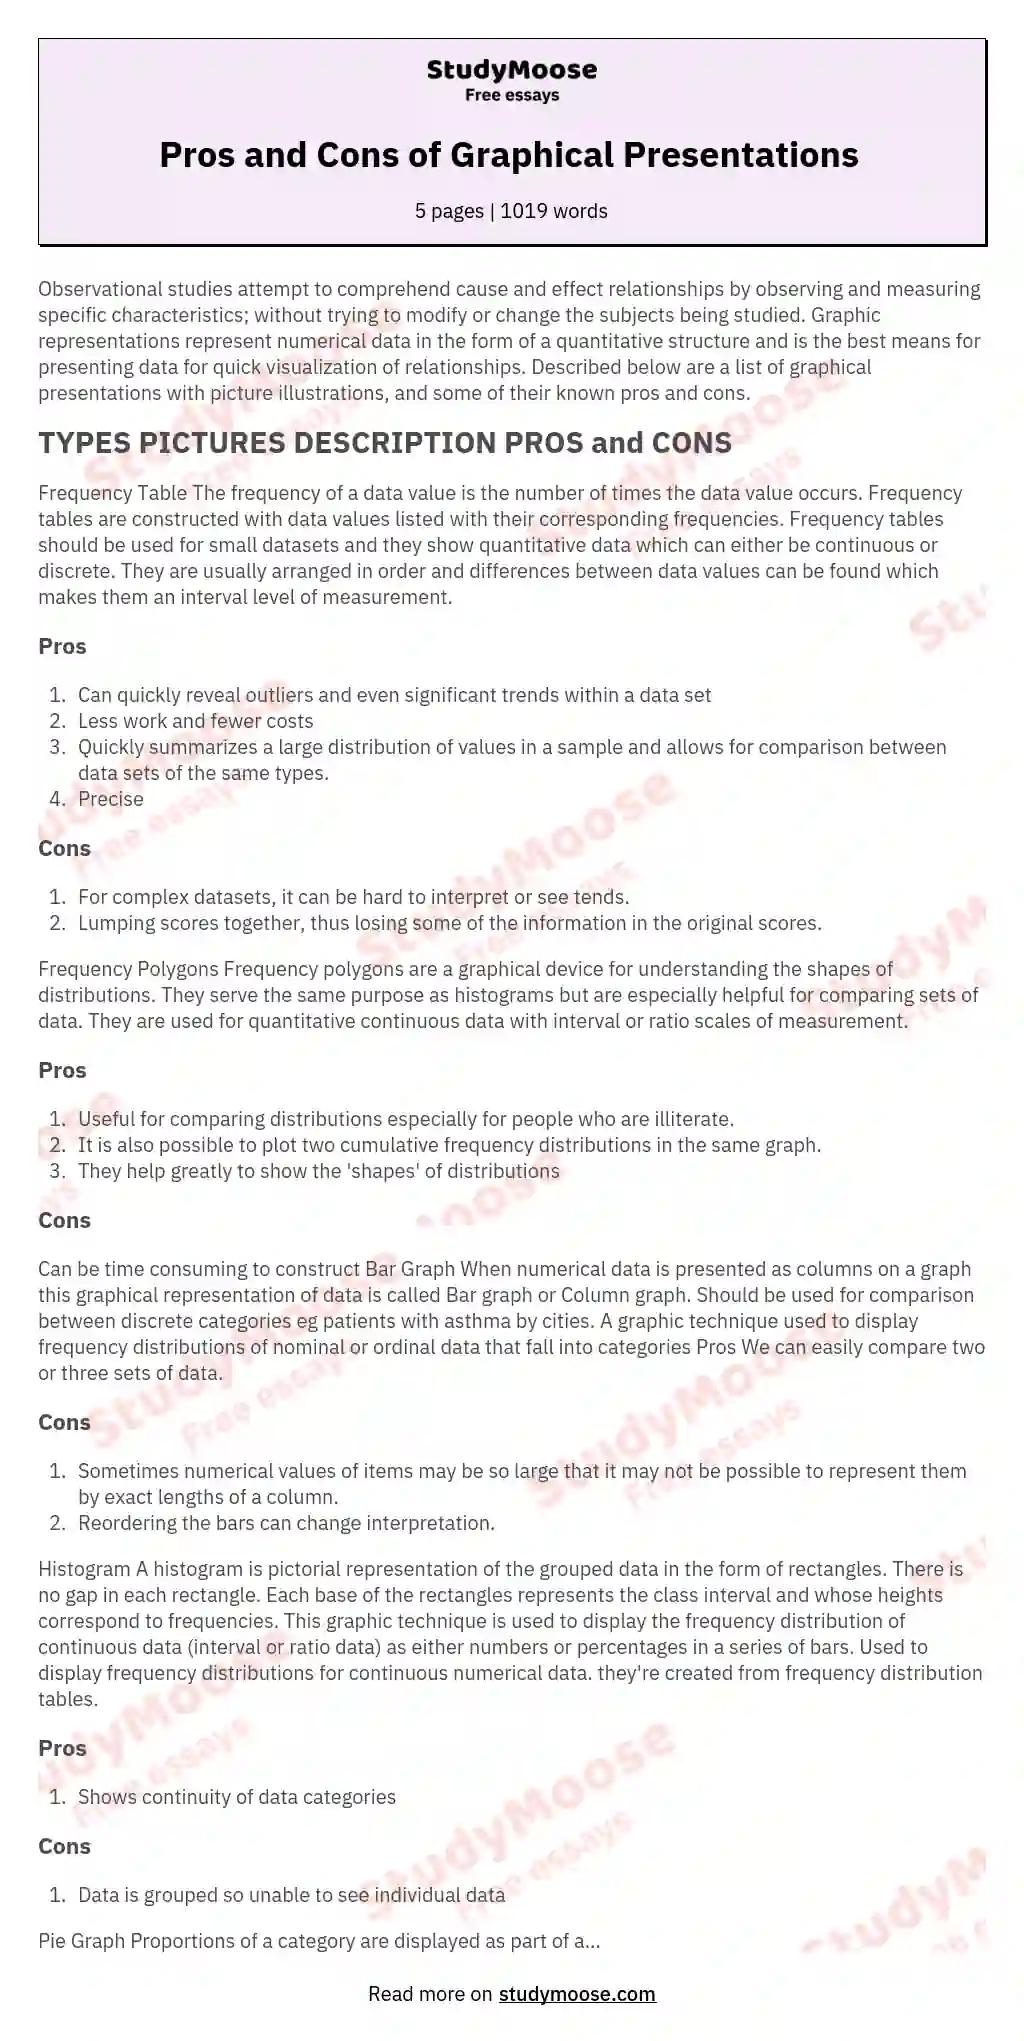 Pros and Cons of Graphical Presentations  essay